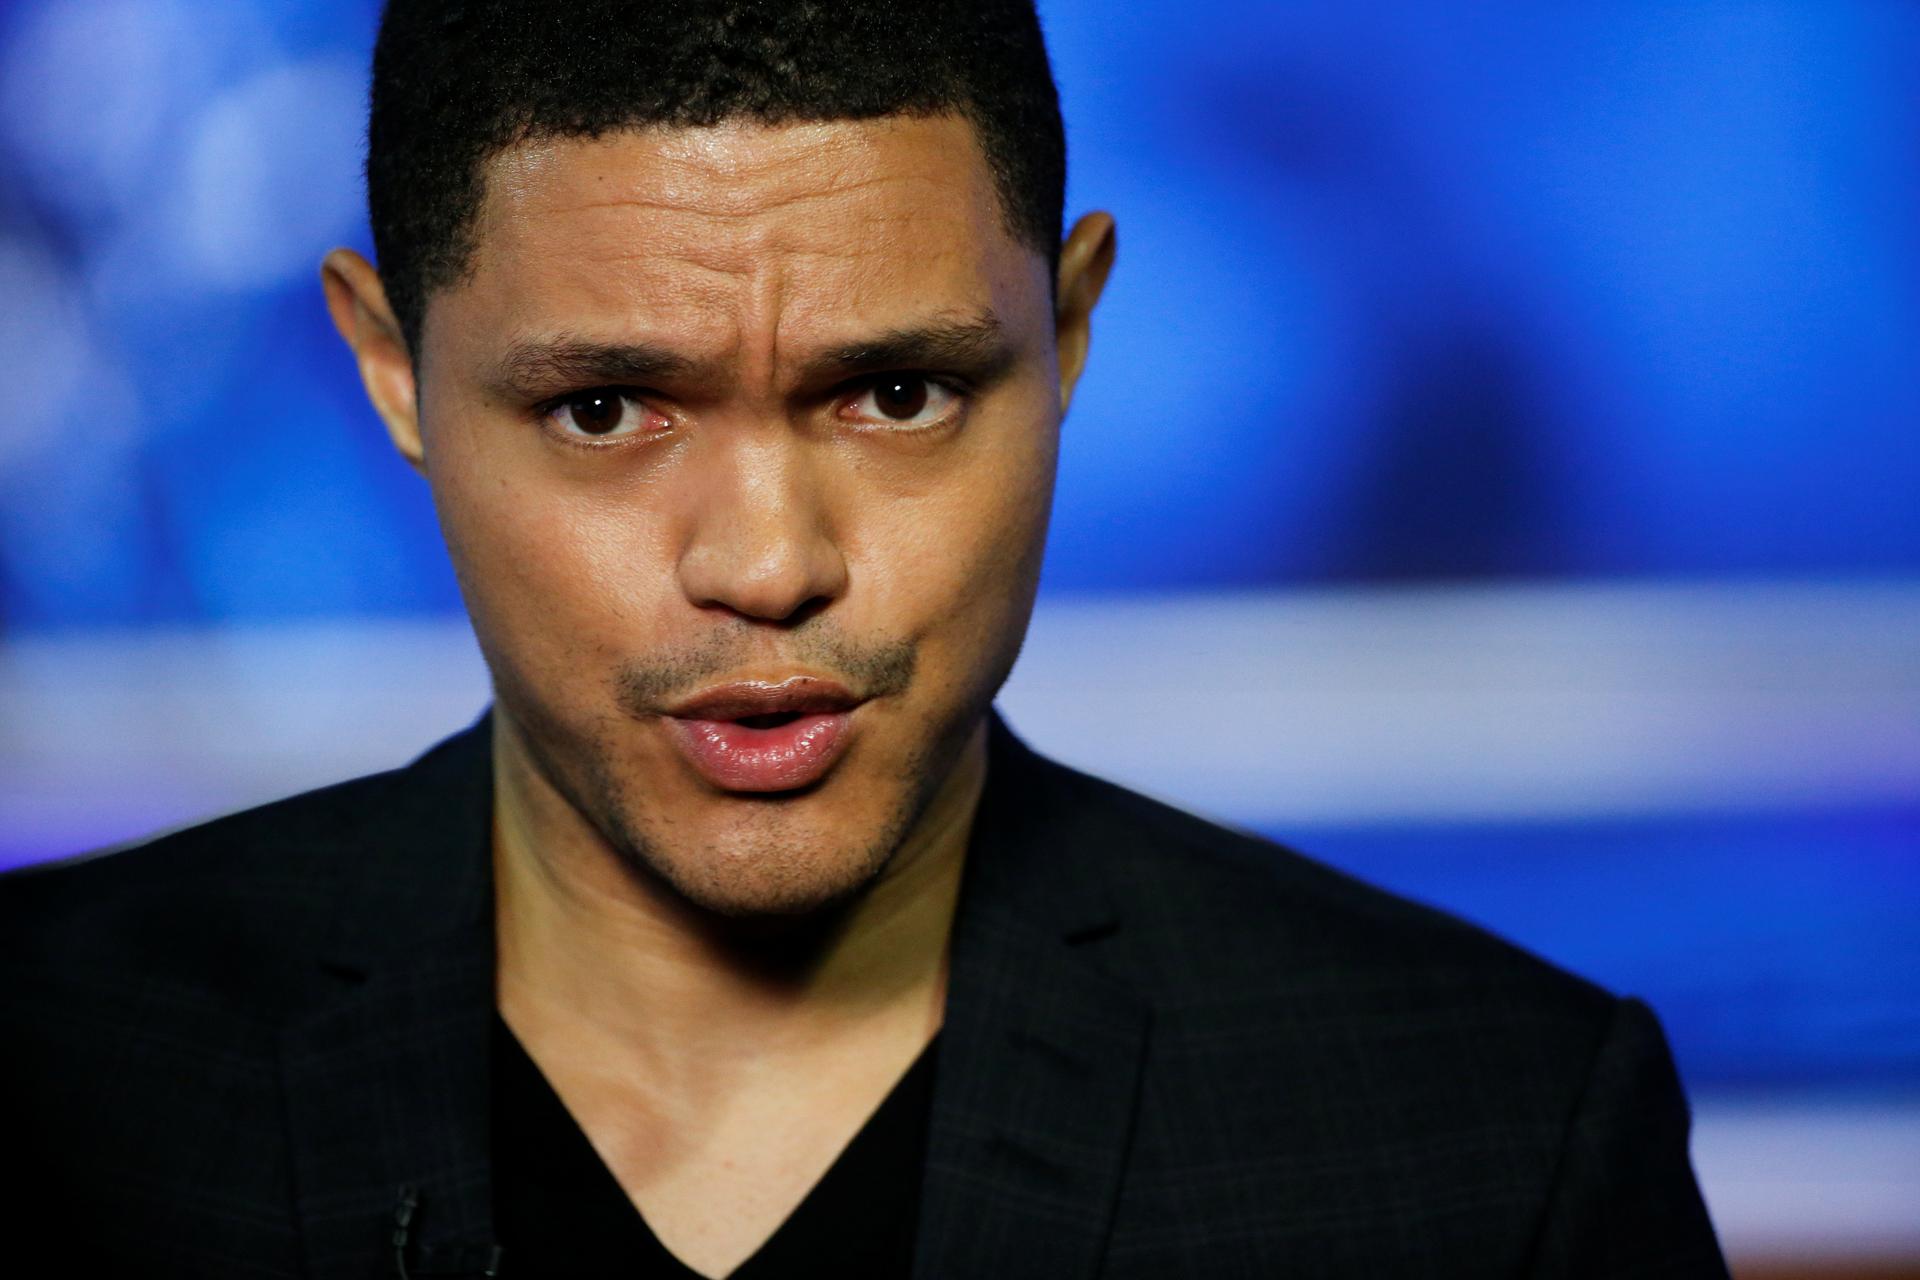 The host of The Daily Show Trevor Noah's new memoir is called Born A Crime: Stories from a South African Childhood.